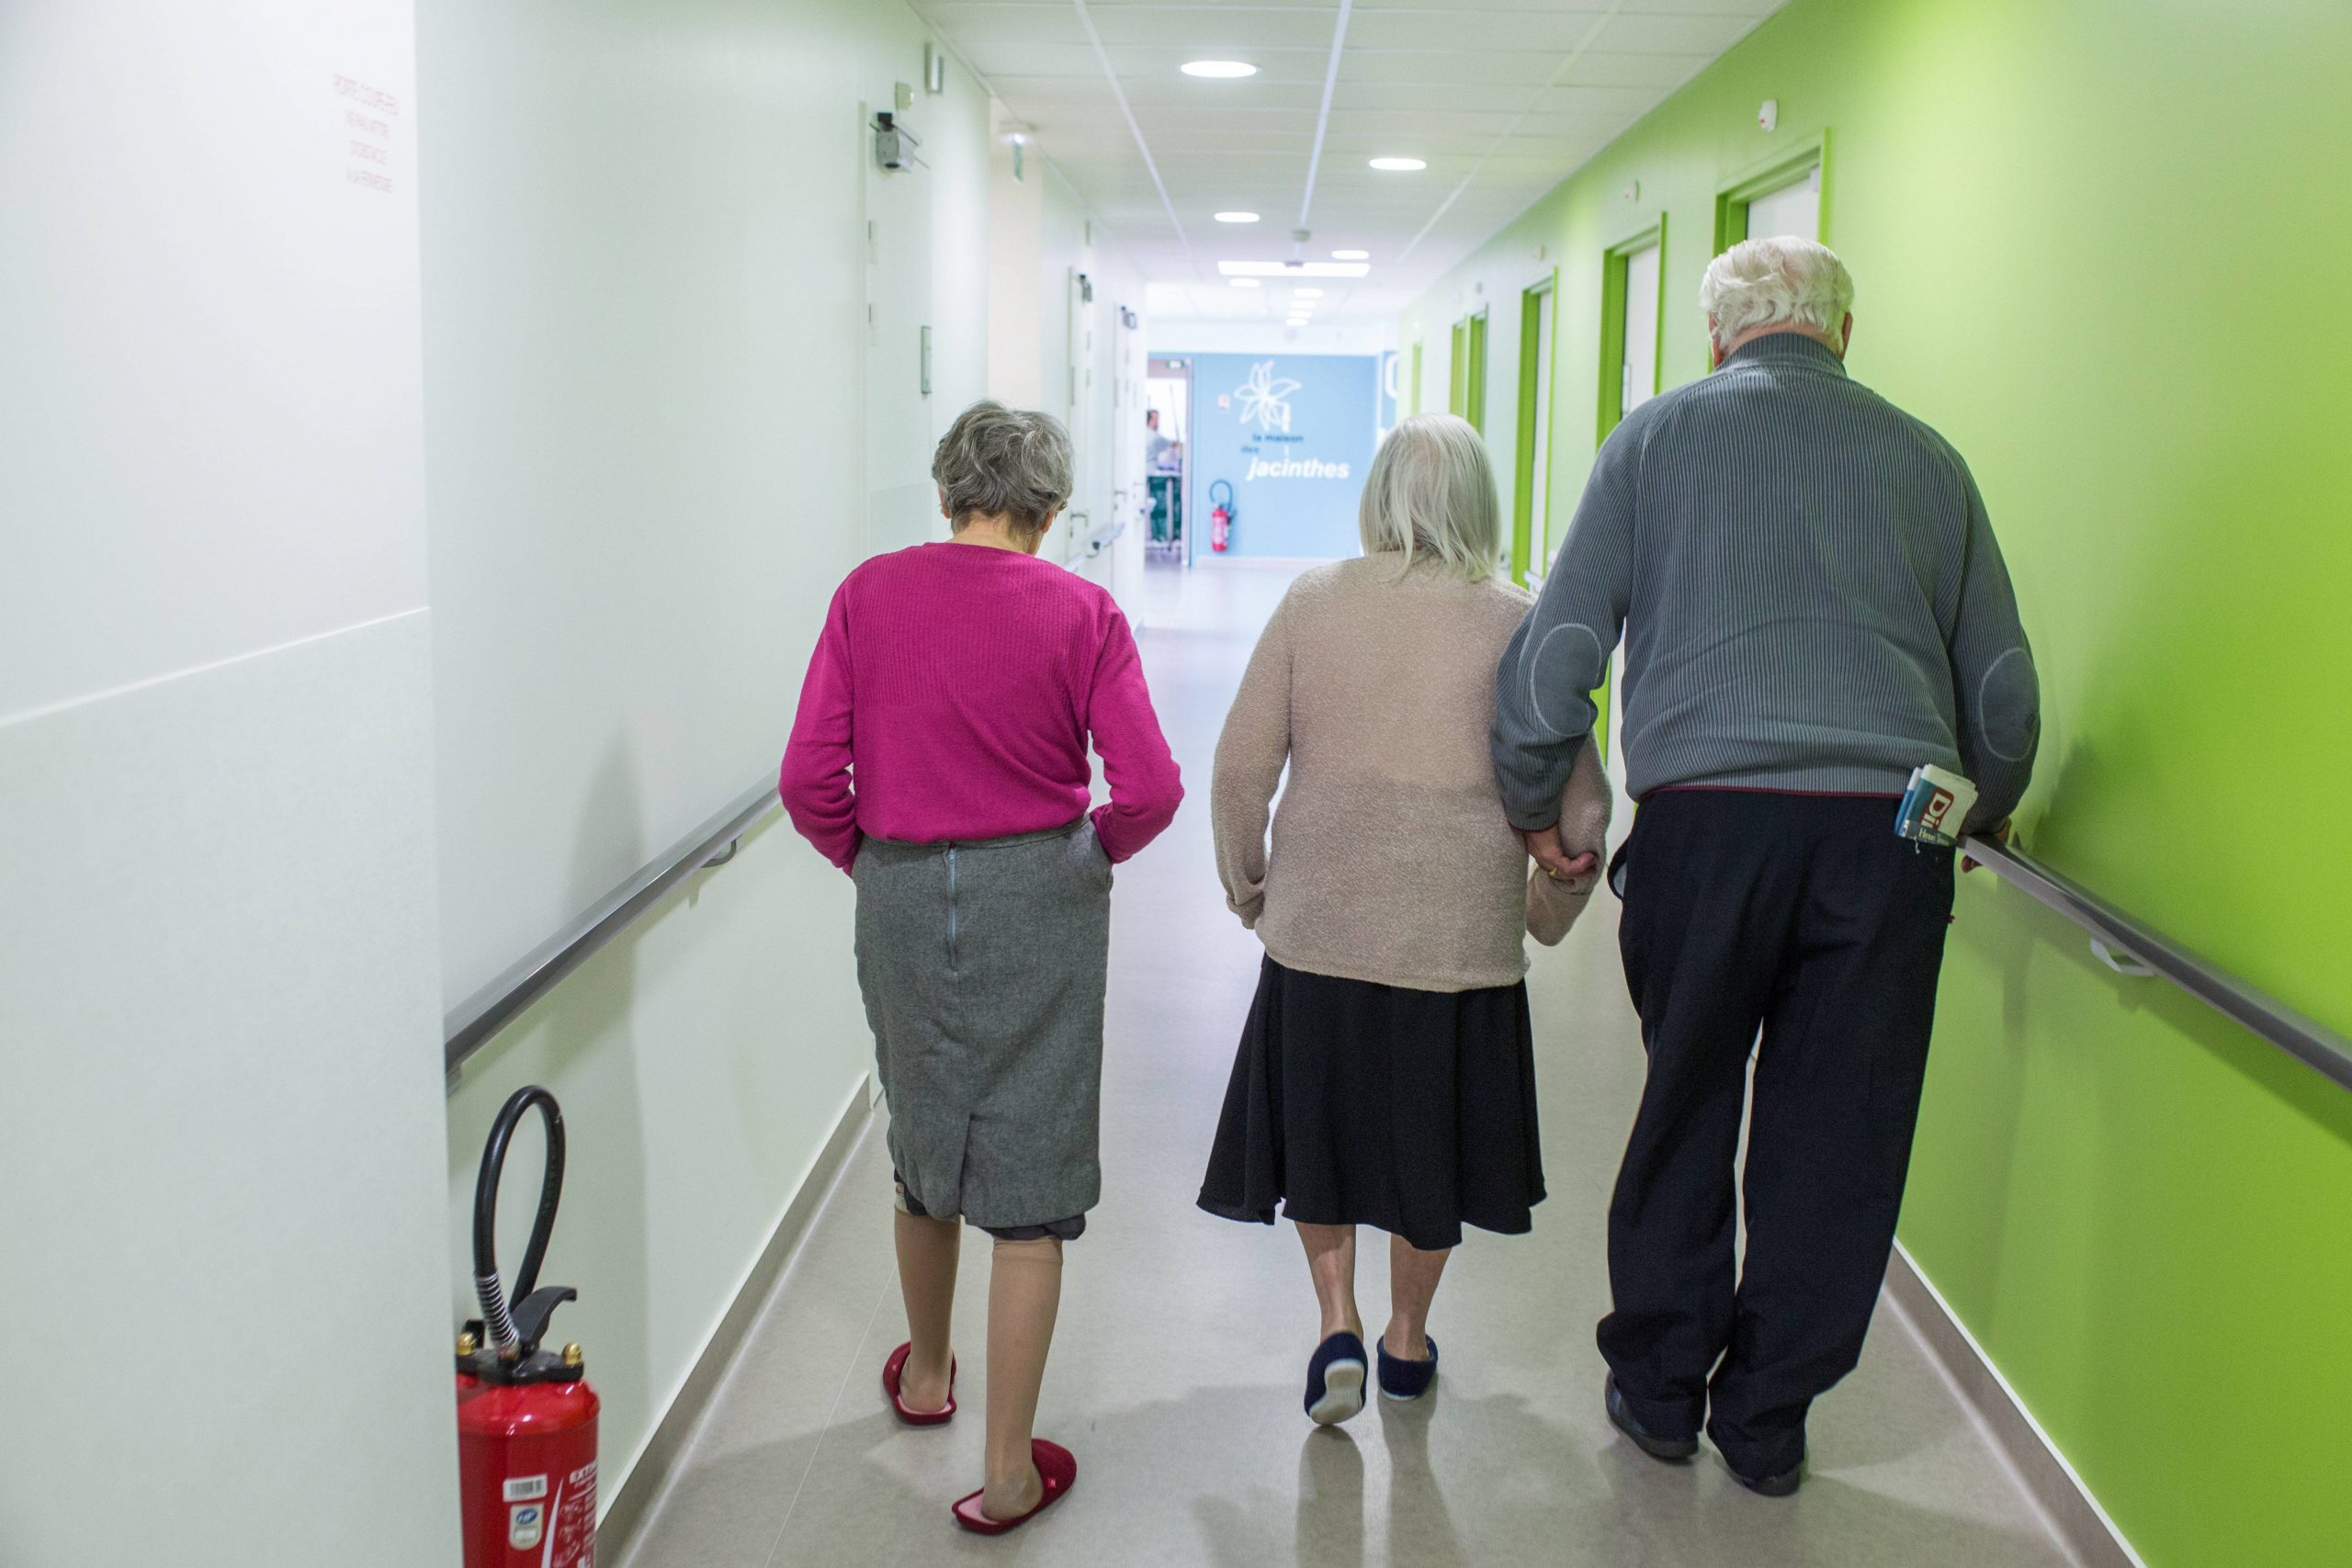 ‘Not enough’ nursing home places in Andalucia and Valencia regions of Spain